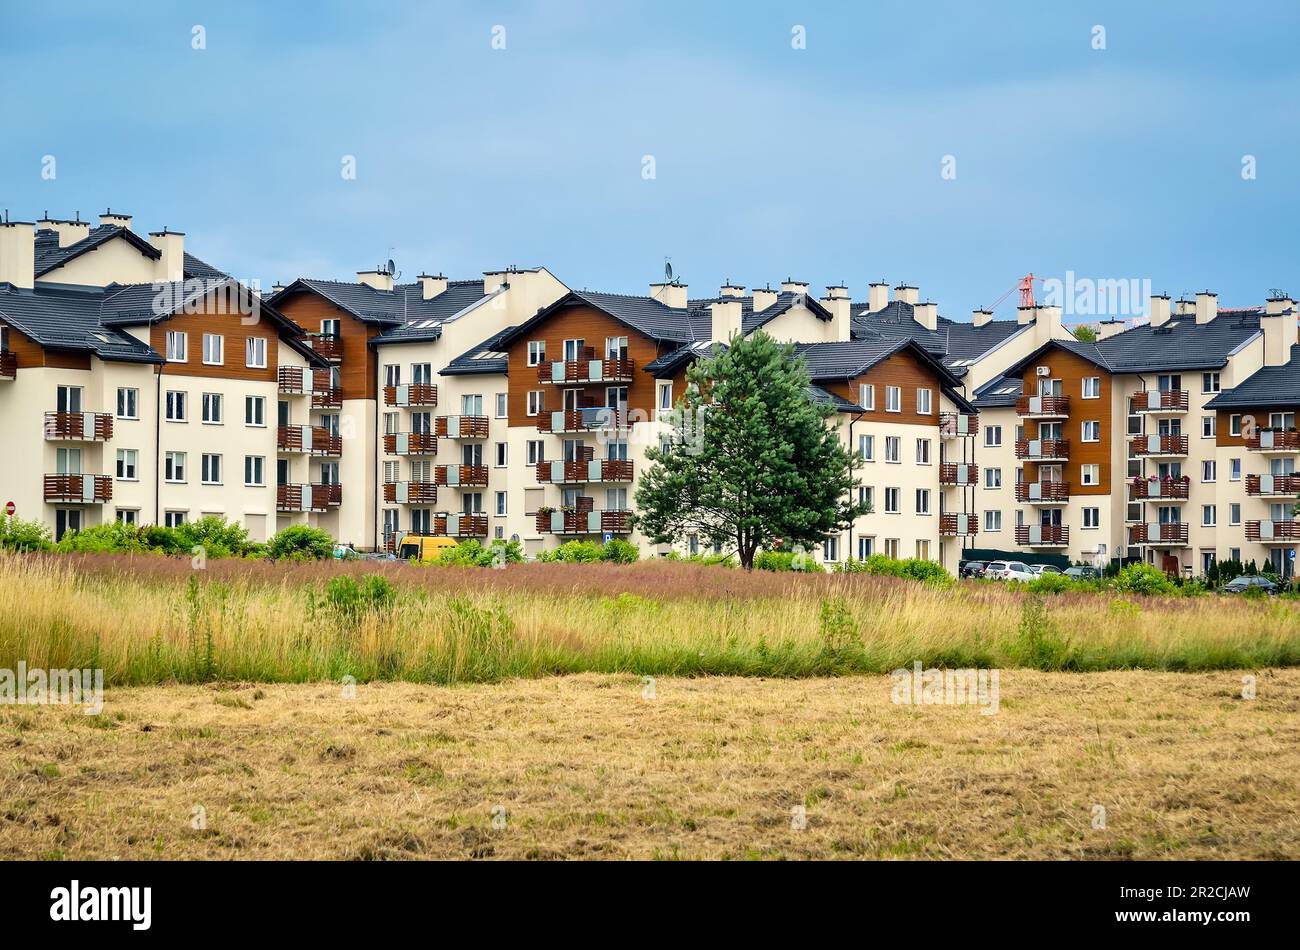 Tychy, Poland - July 14, 2015: New housing estates in Tychy City, Poland. Public view of newly built block of flats in the green area. Stock Photo